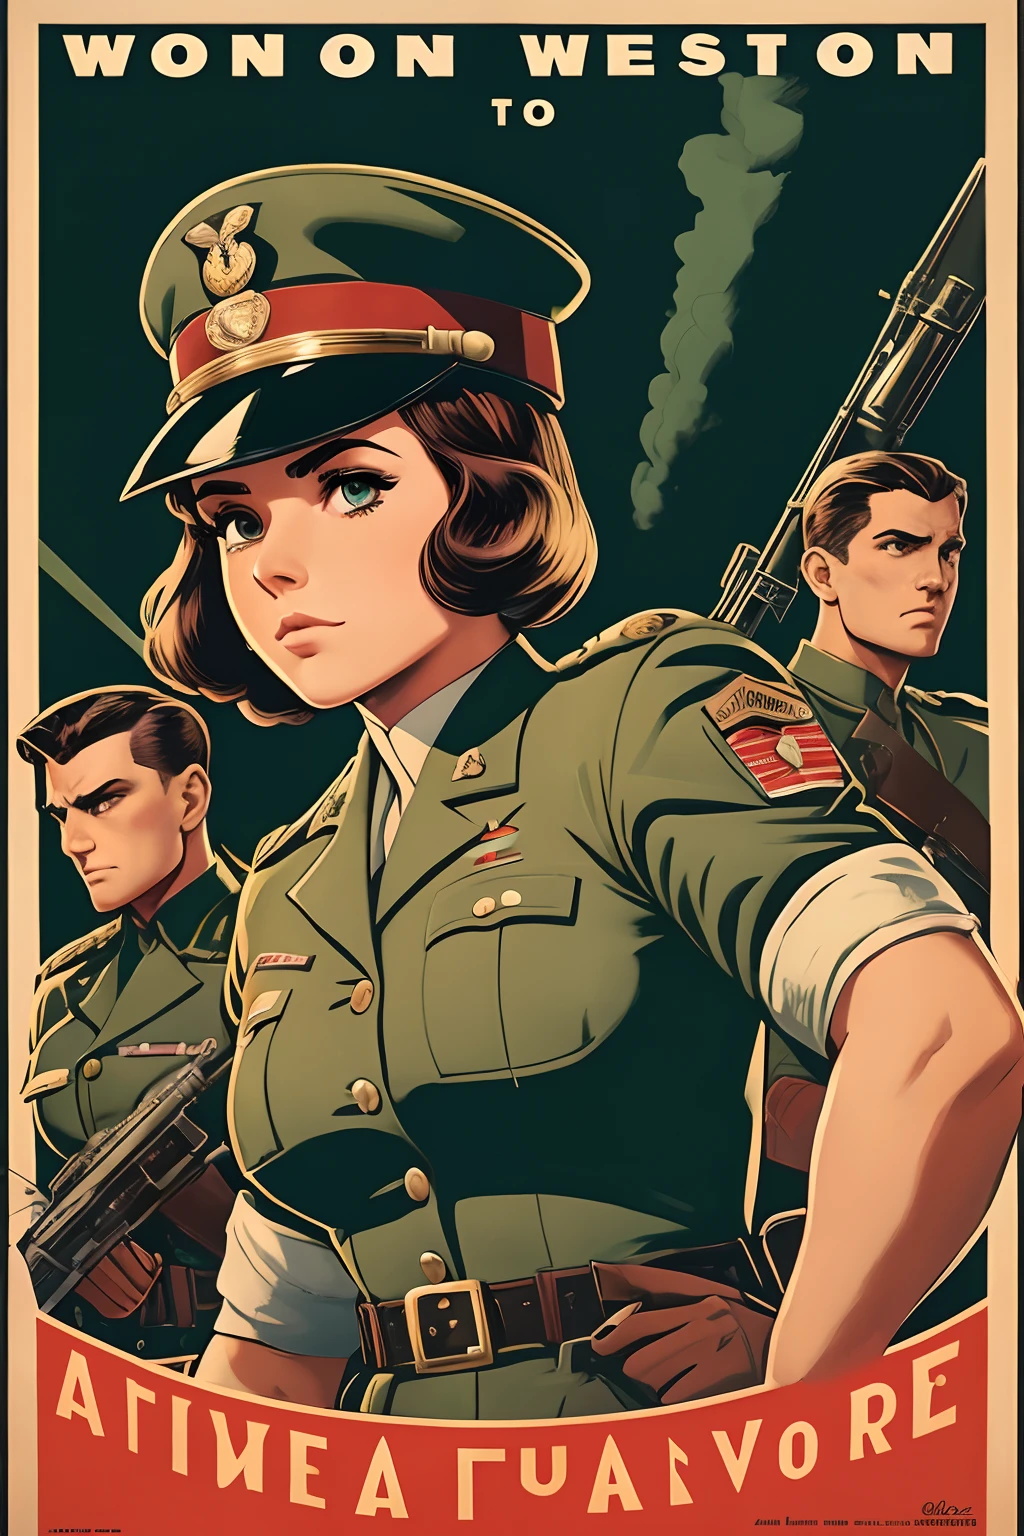 Art inspired by John Buscema, World War II poster, we see a female cadet holding a mortar, perfect military uniform, short hair up to the shoulders, Red hair color, clear green eyes, breasts small, corpo delgado, imposing on the battlefield, Cannon fire, A scene showing seriousness and conviction